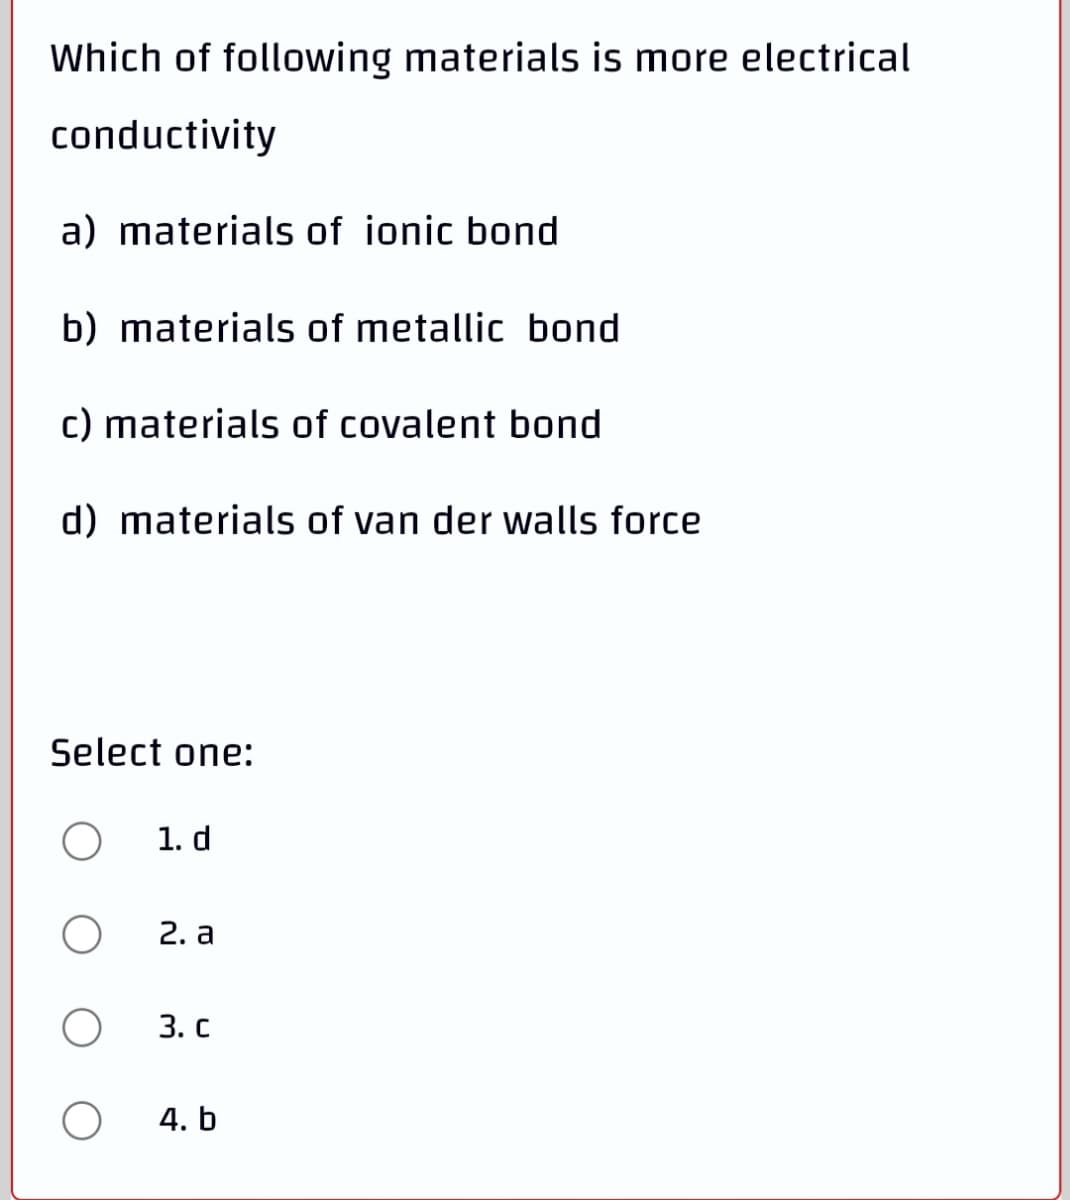 Which of following materials is more electrical
conductivity
a) materials of ionic bond
b) materials of metallic bond
c) materials of covalent bond
d) materials of van der walls force
Select one:
1. d
2. а
3. с
4. b
